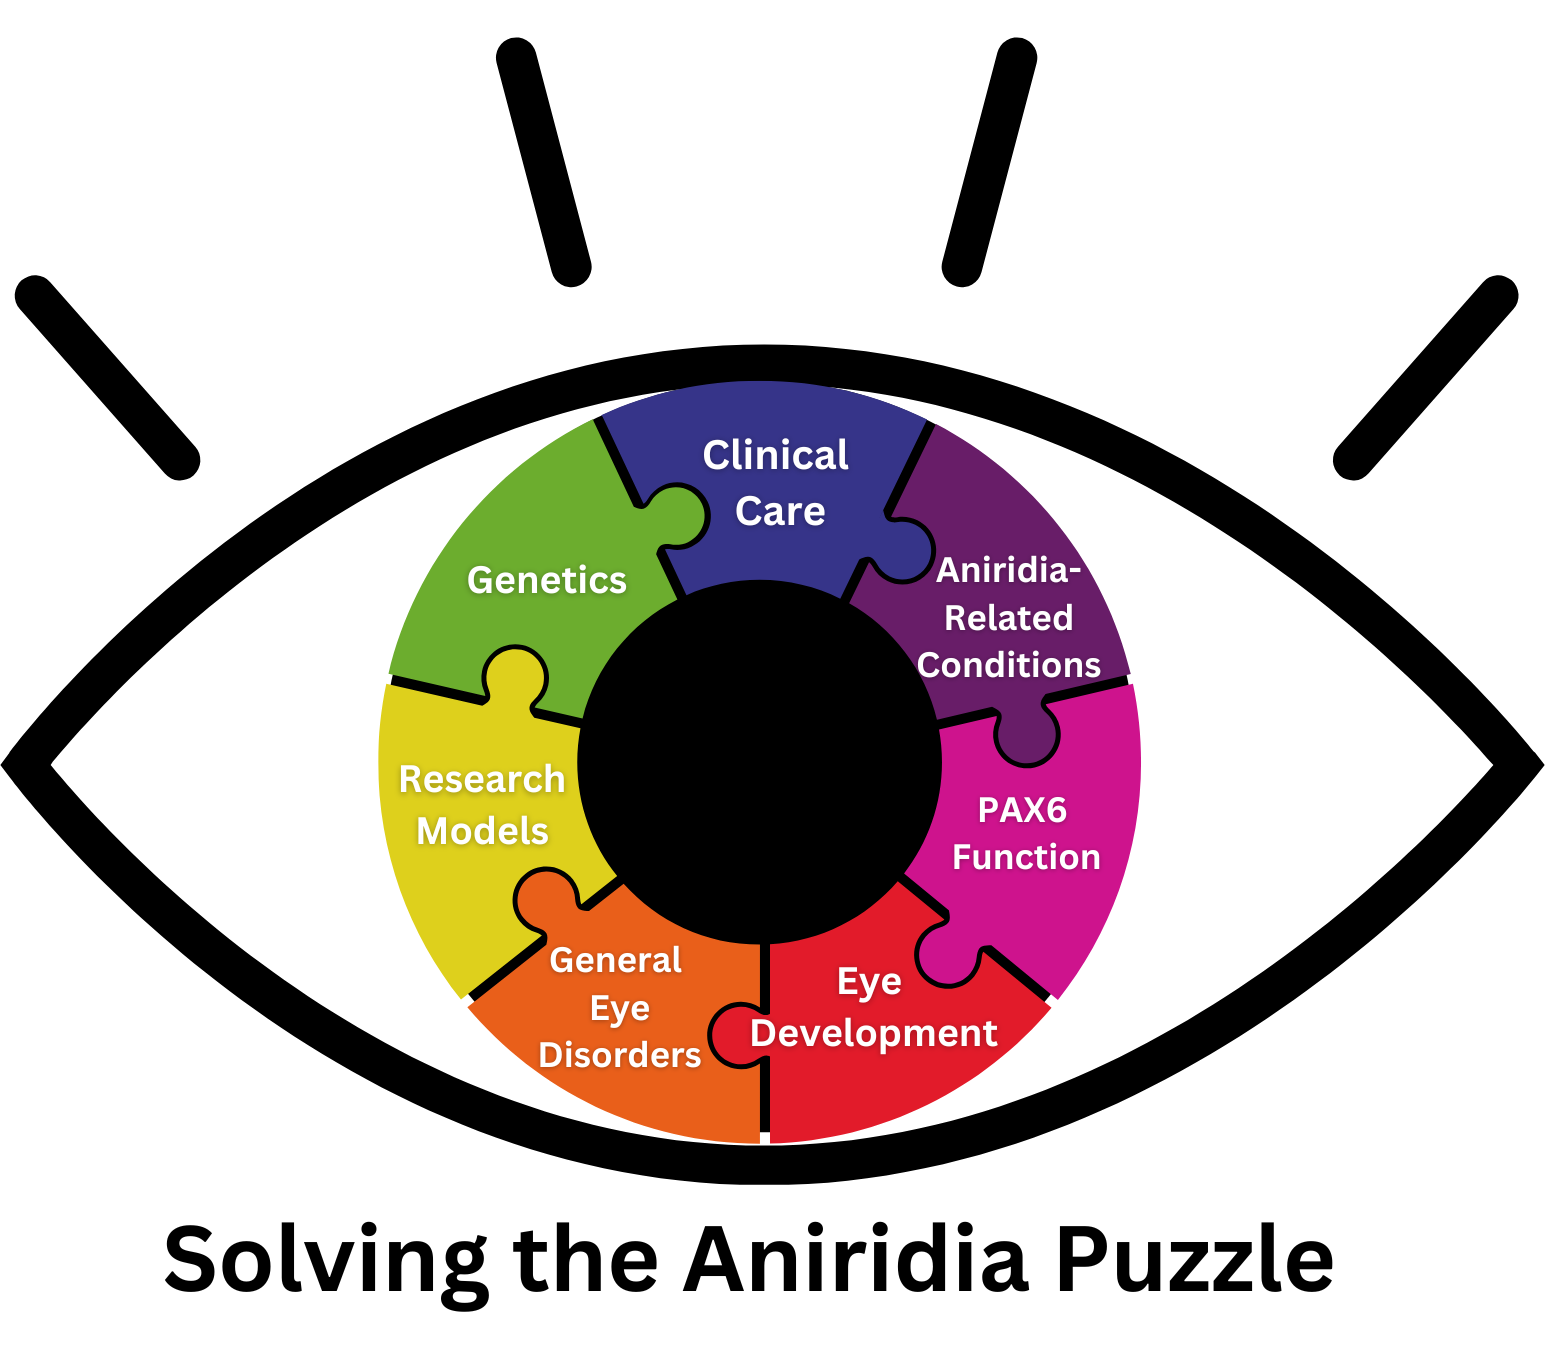 Image is an Eye shape with an iris made out of Puzzle pieces. The puzzle pieces are labeled Clinical Care, Aniridia-Related Conditions, PAX6 Function, Eye Development, General Eye disorders, Research Models, and Genetics.